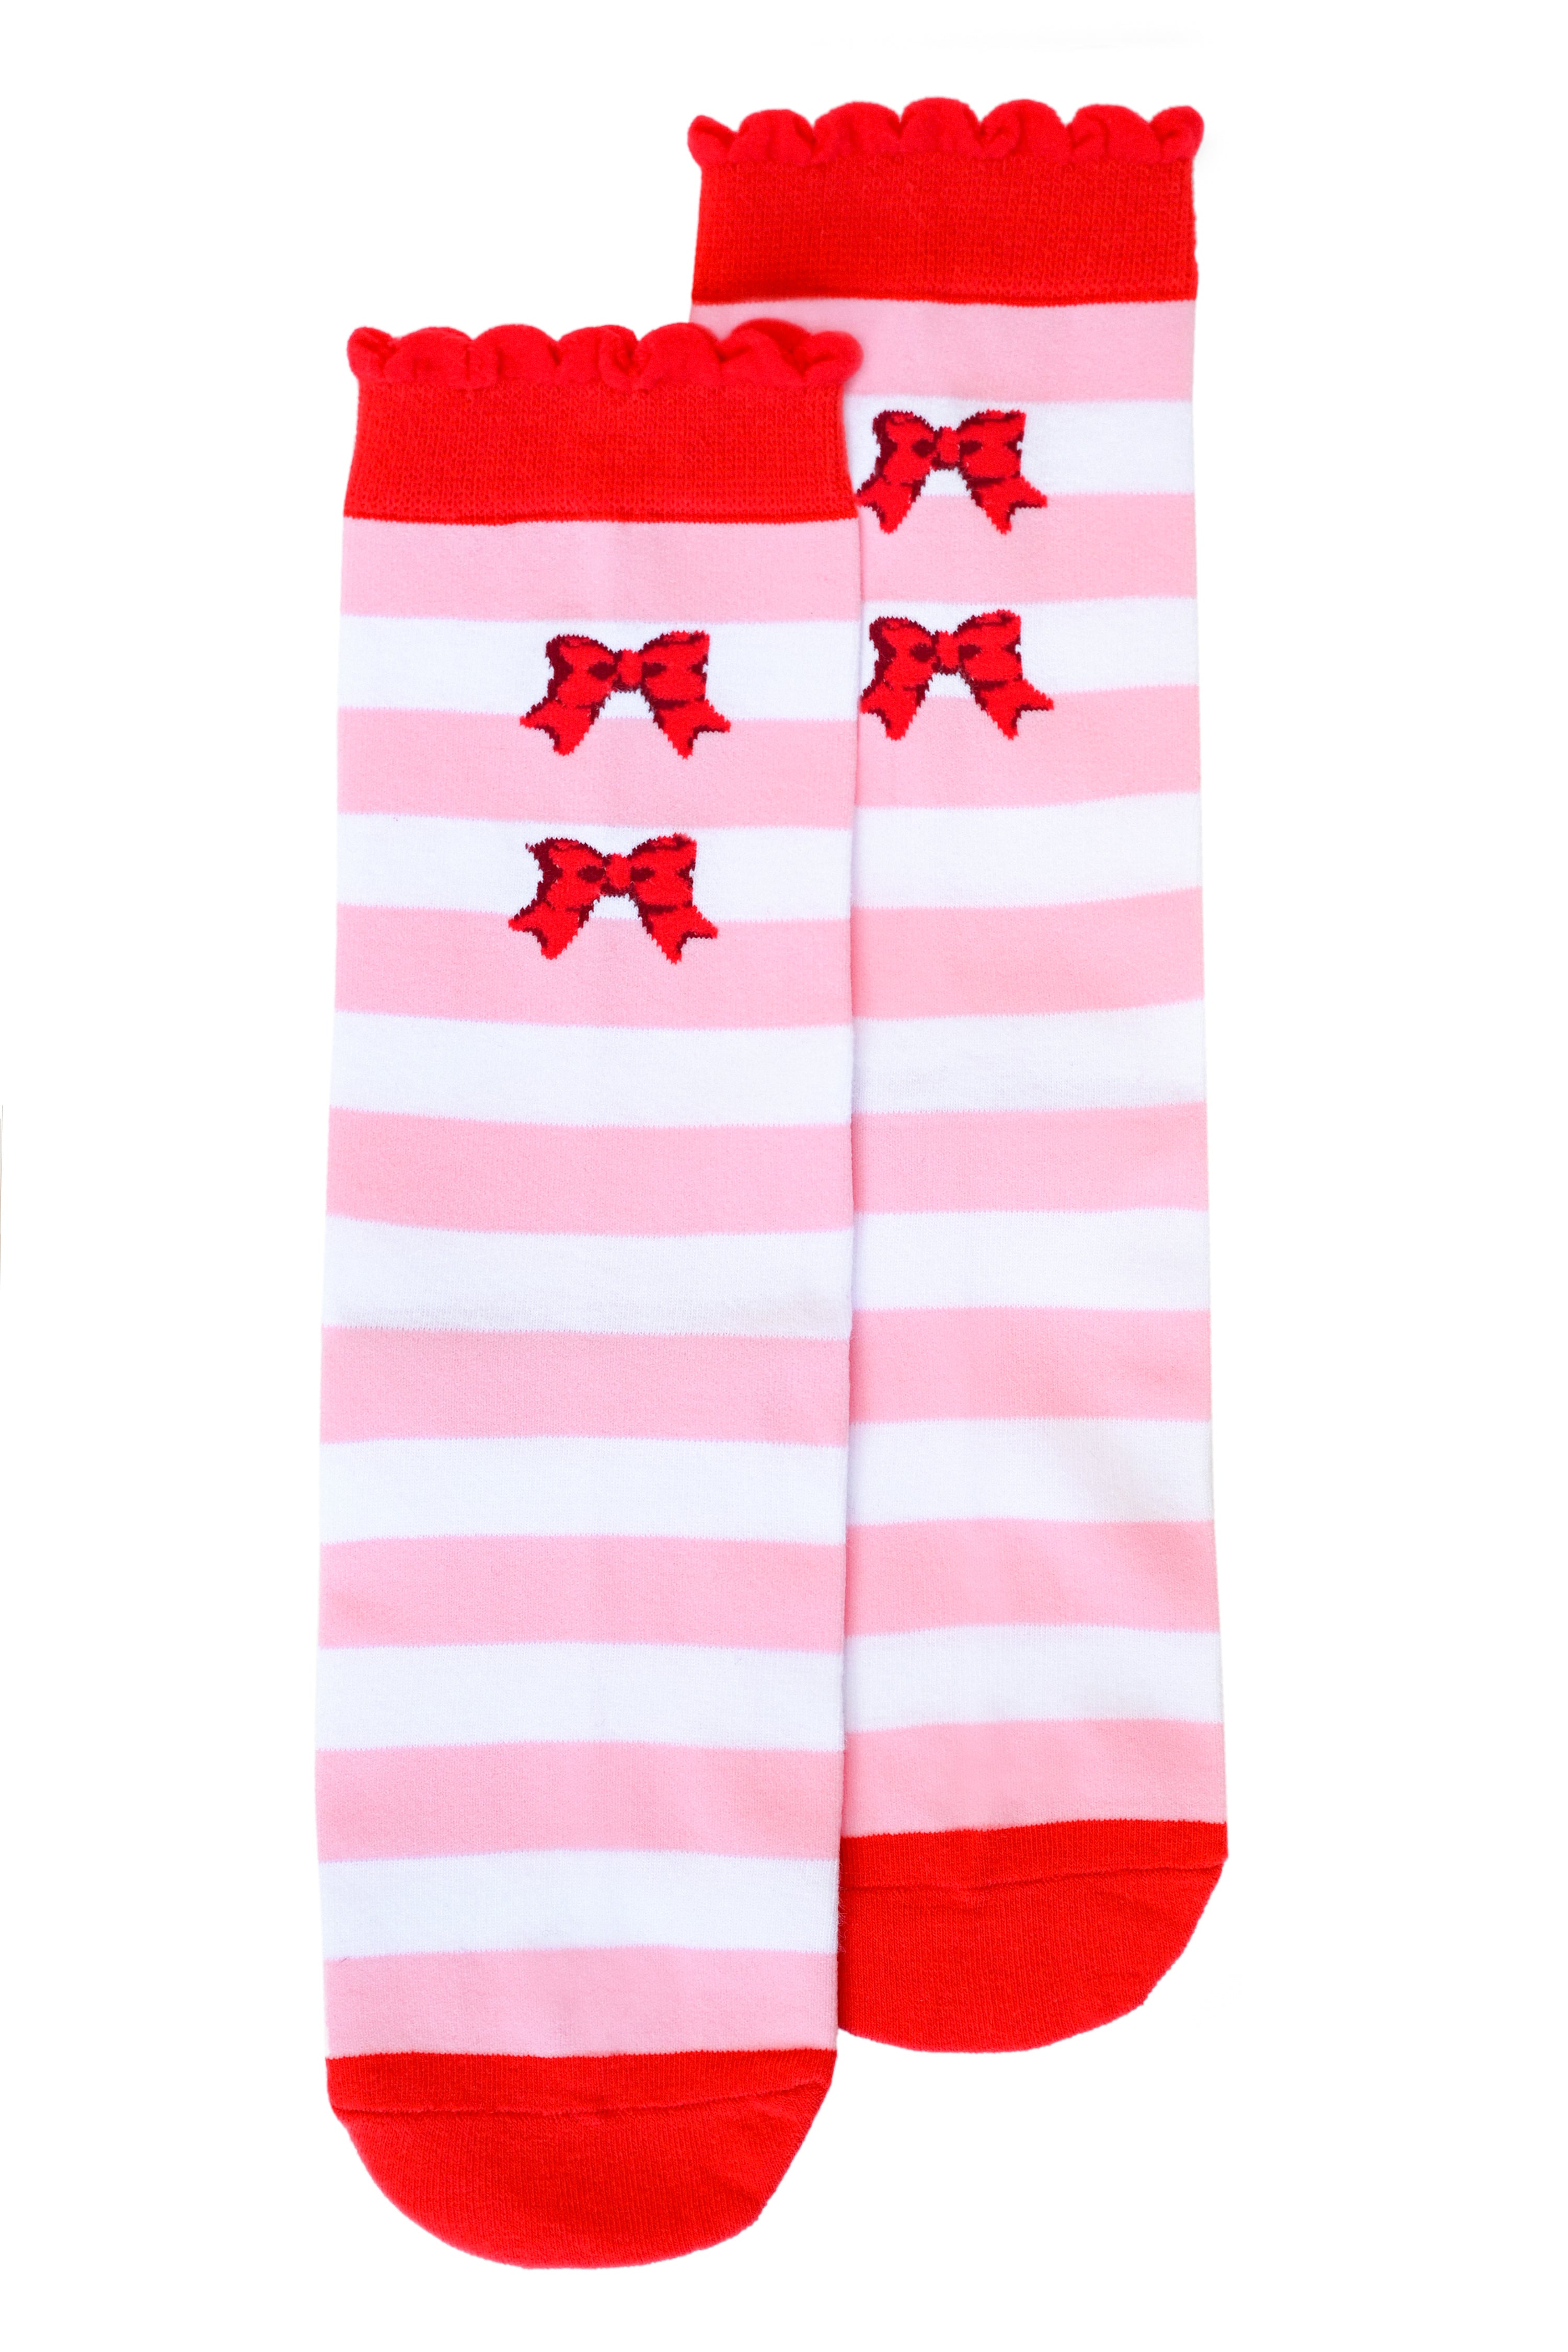 Pastel pink and white horizontal striped socks with red ruffle/cuff, toe, and heel. Red bows on the front of the sock.